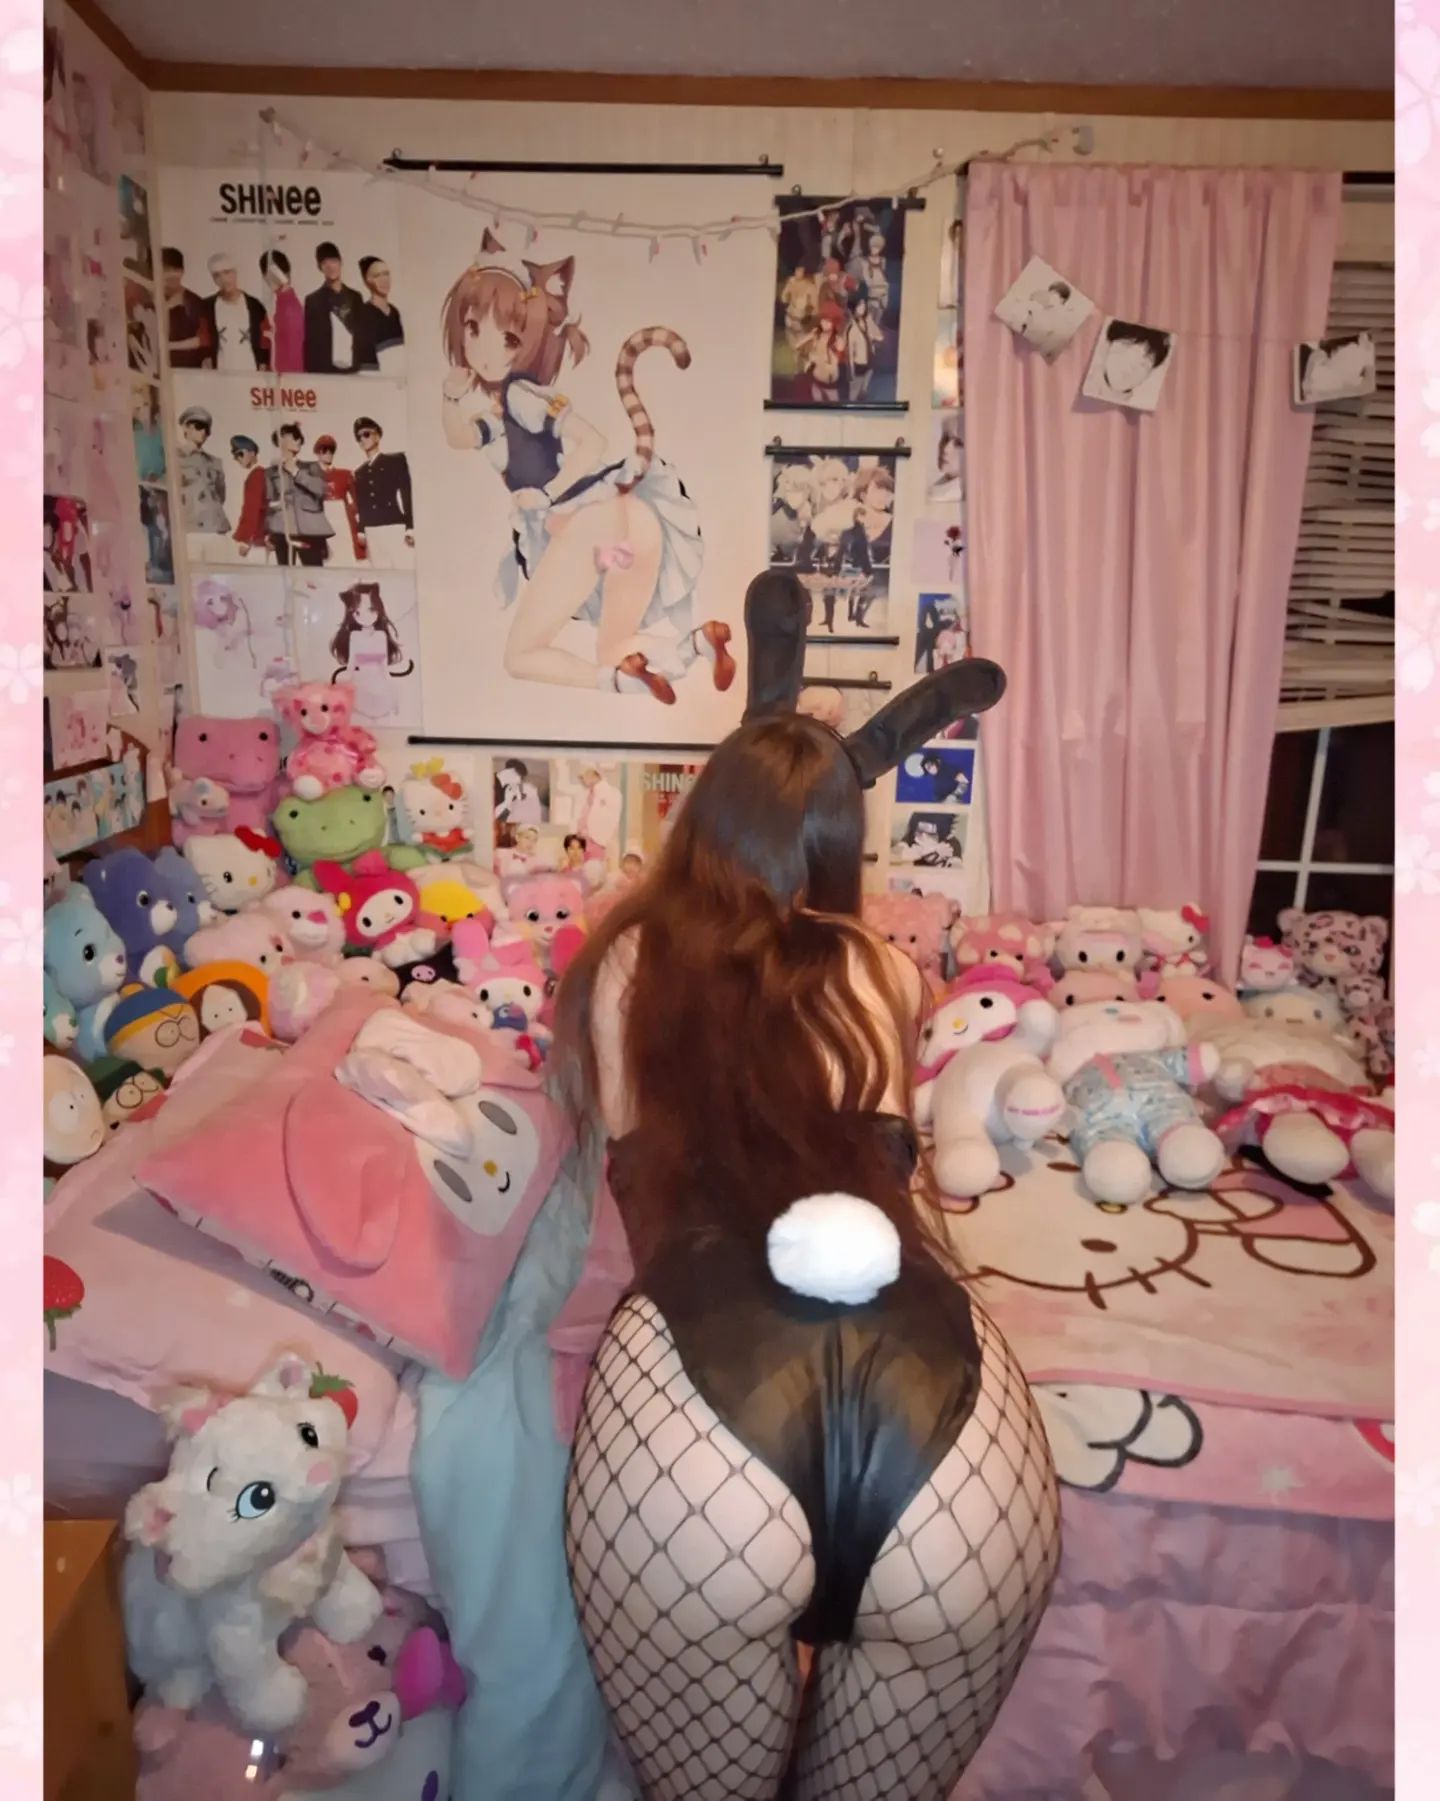 Keep swiping 🤭🐰
♡
New to my content? Check out the link in my bio! There is so much content to see from me!🖤
♡
#bunnygirl #bunnycosplay #bunny #egirl #altgirl #cosplaygirl #cosplaying #cosplay #brunette #modeling #model #sanrio #pinkroom #kawaiigirl #kawaiistyle #kawaii #fishnets #cutecore #cutegirl #explore #explorepage